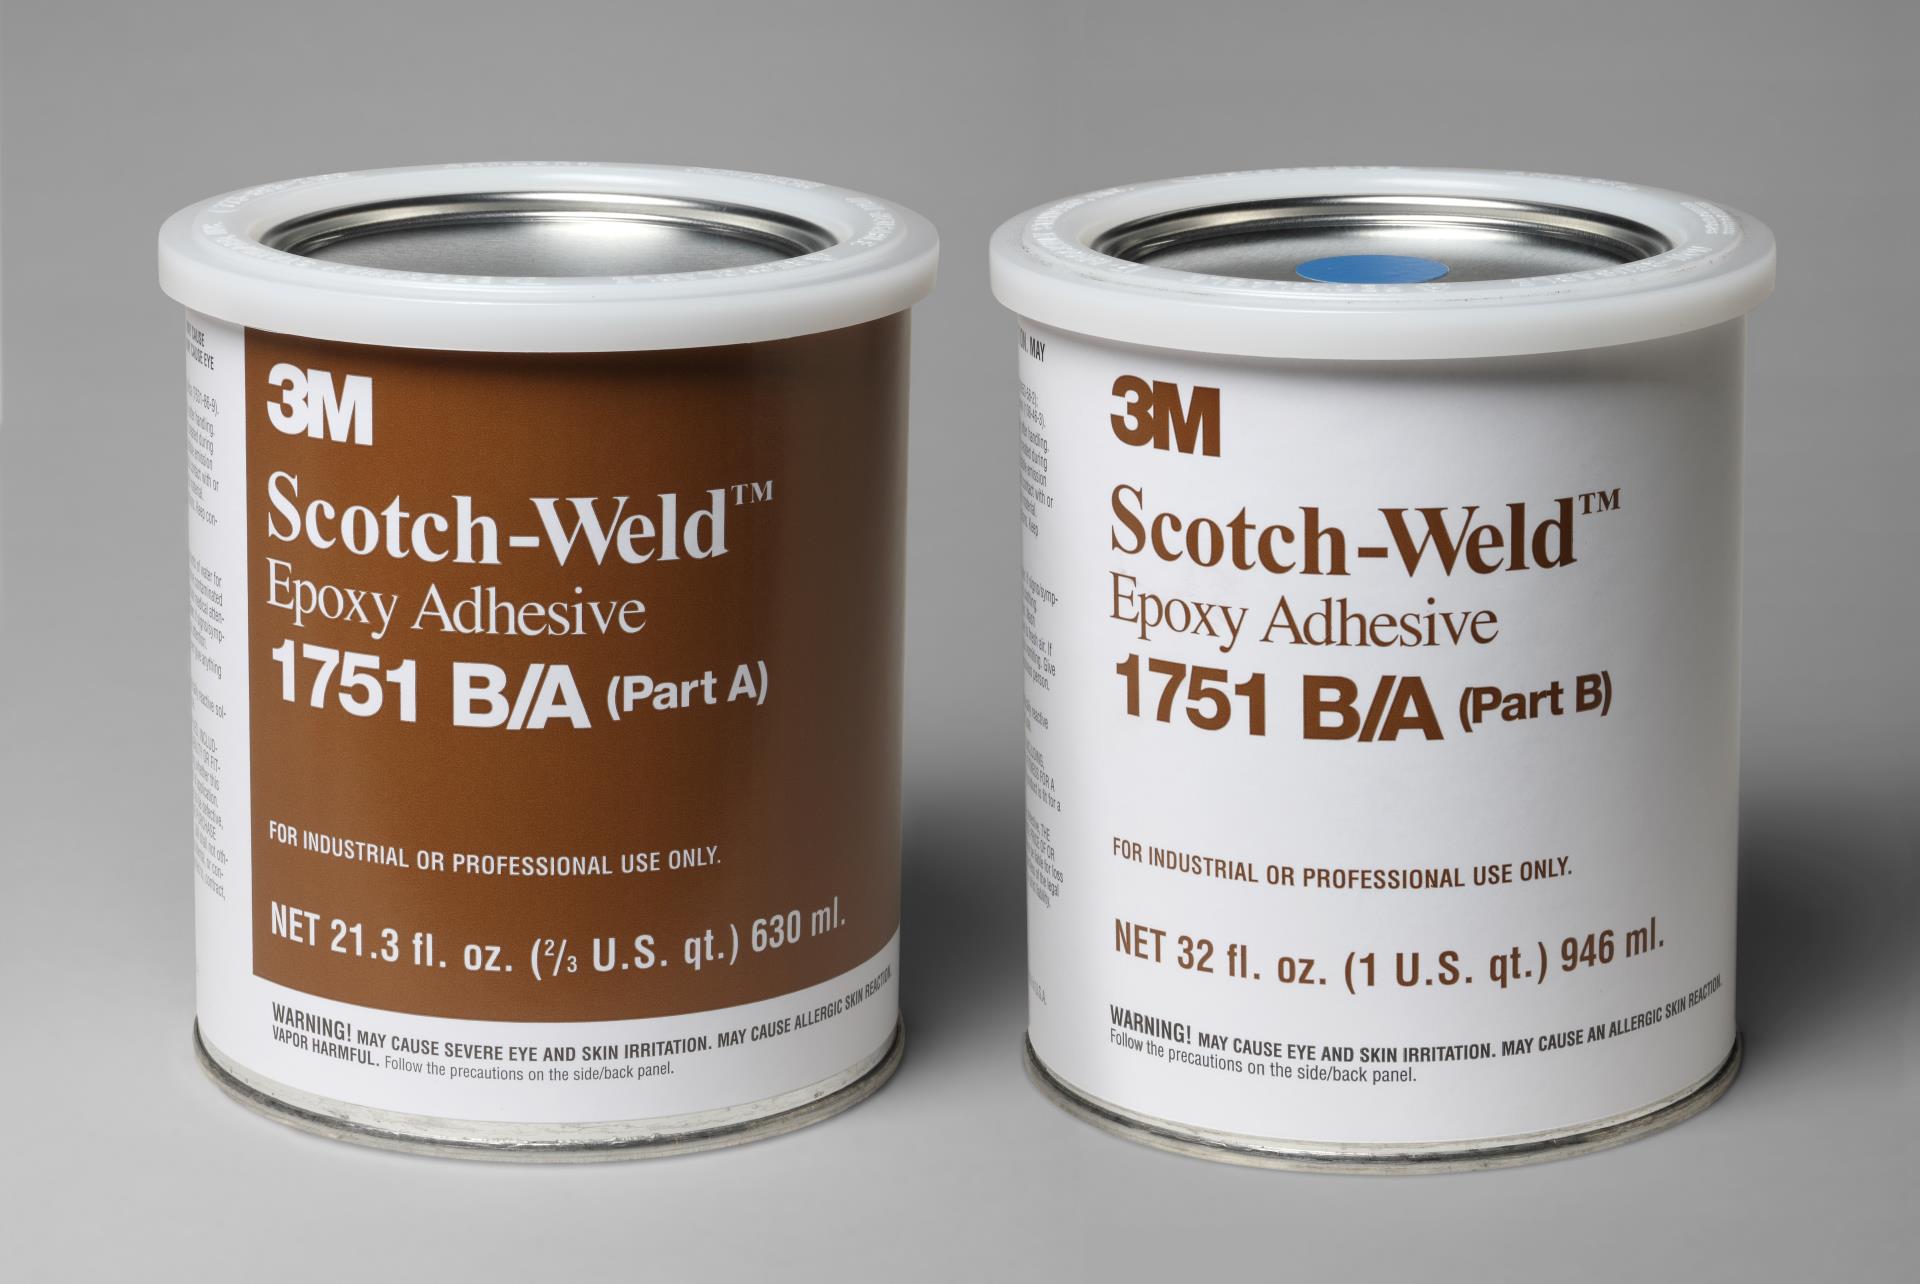 https://www.e-aircraftsupply.com/ItemImages/37/7000046337_3M_Scotch-Weld_Epoxy_Adhesive_1751_Gray_Part_BA.jpg